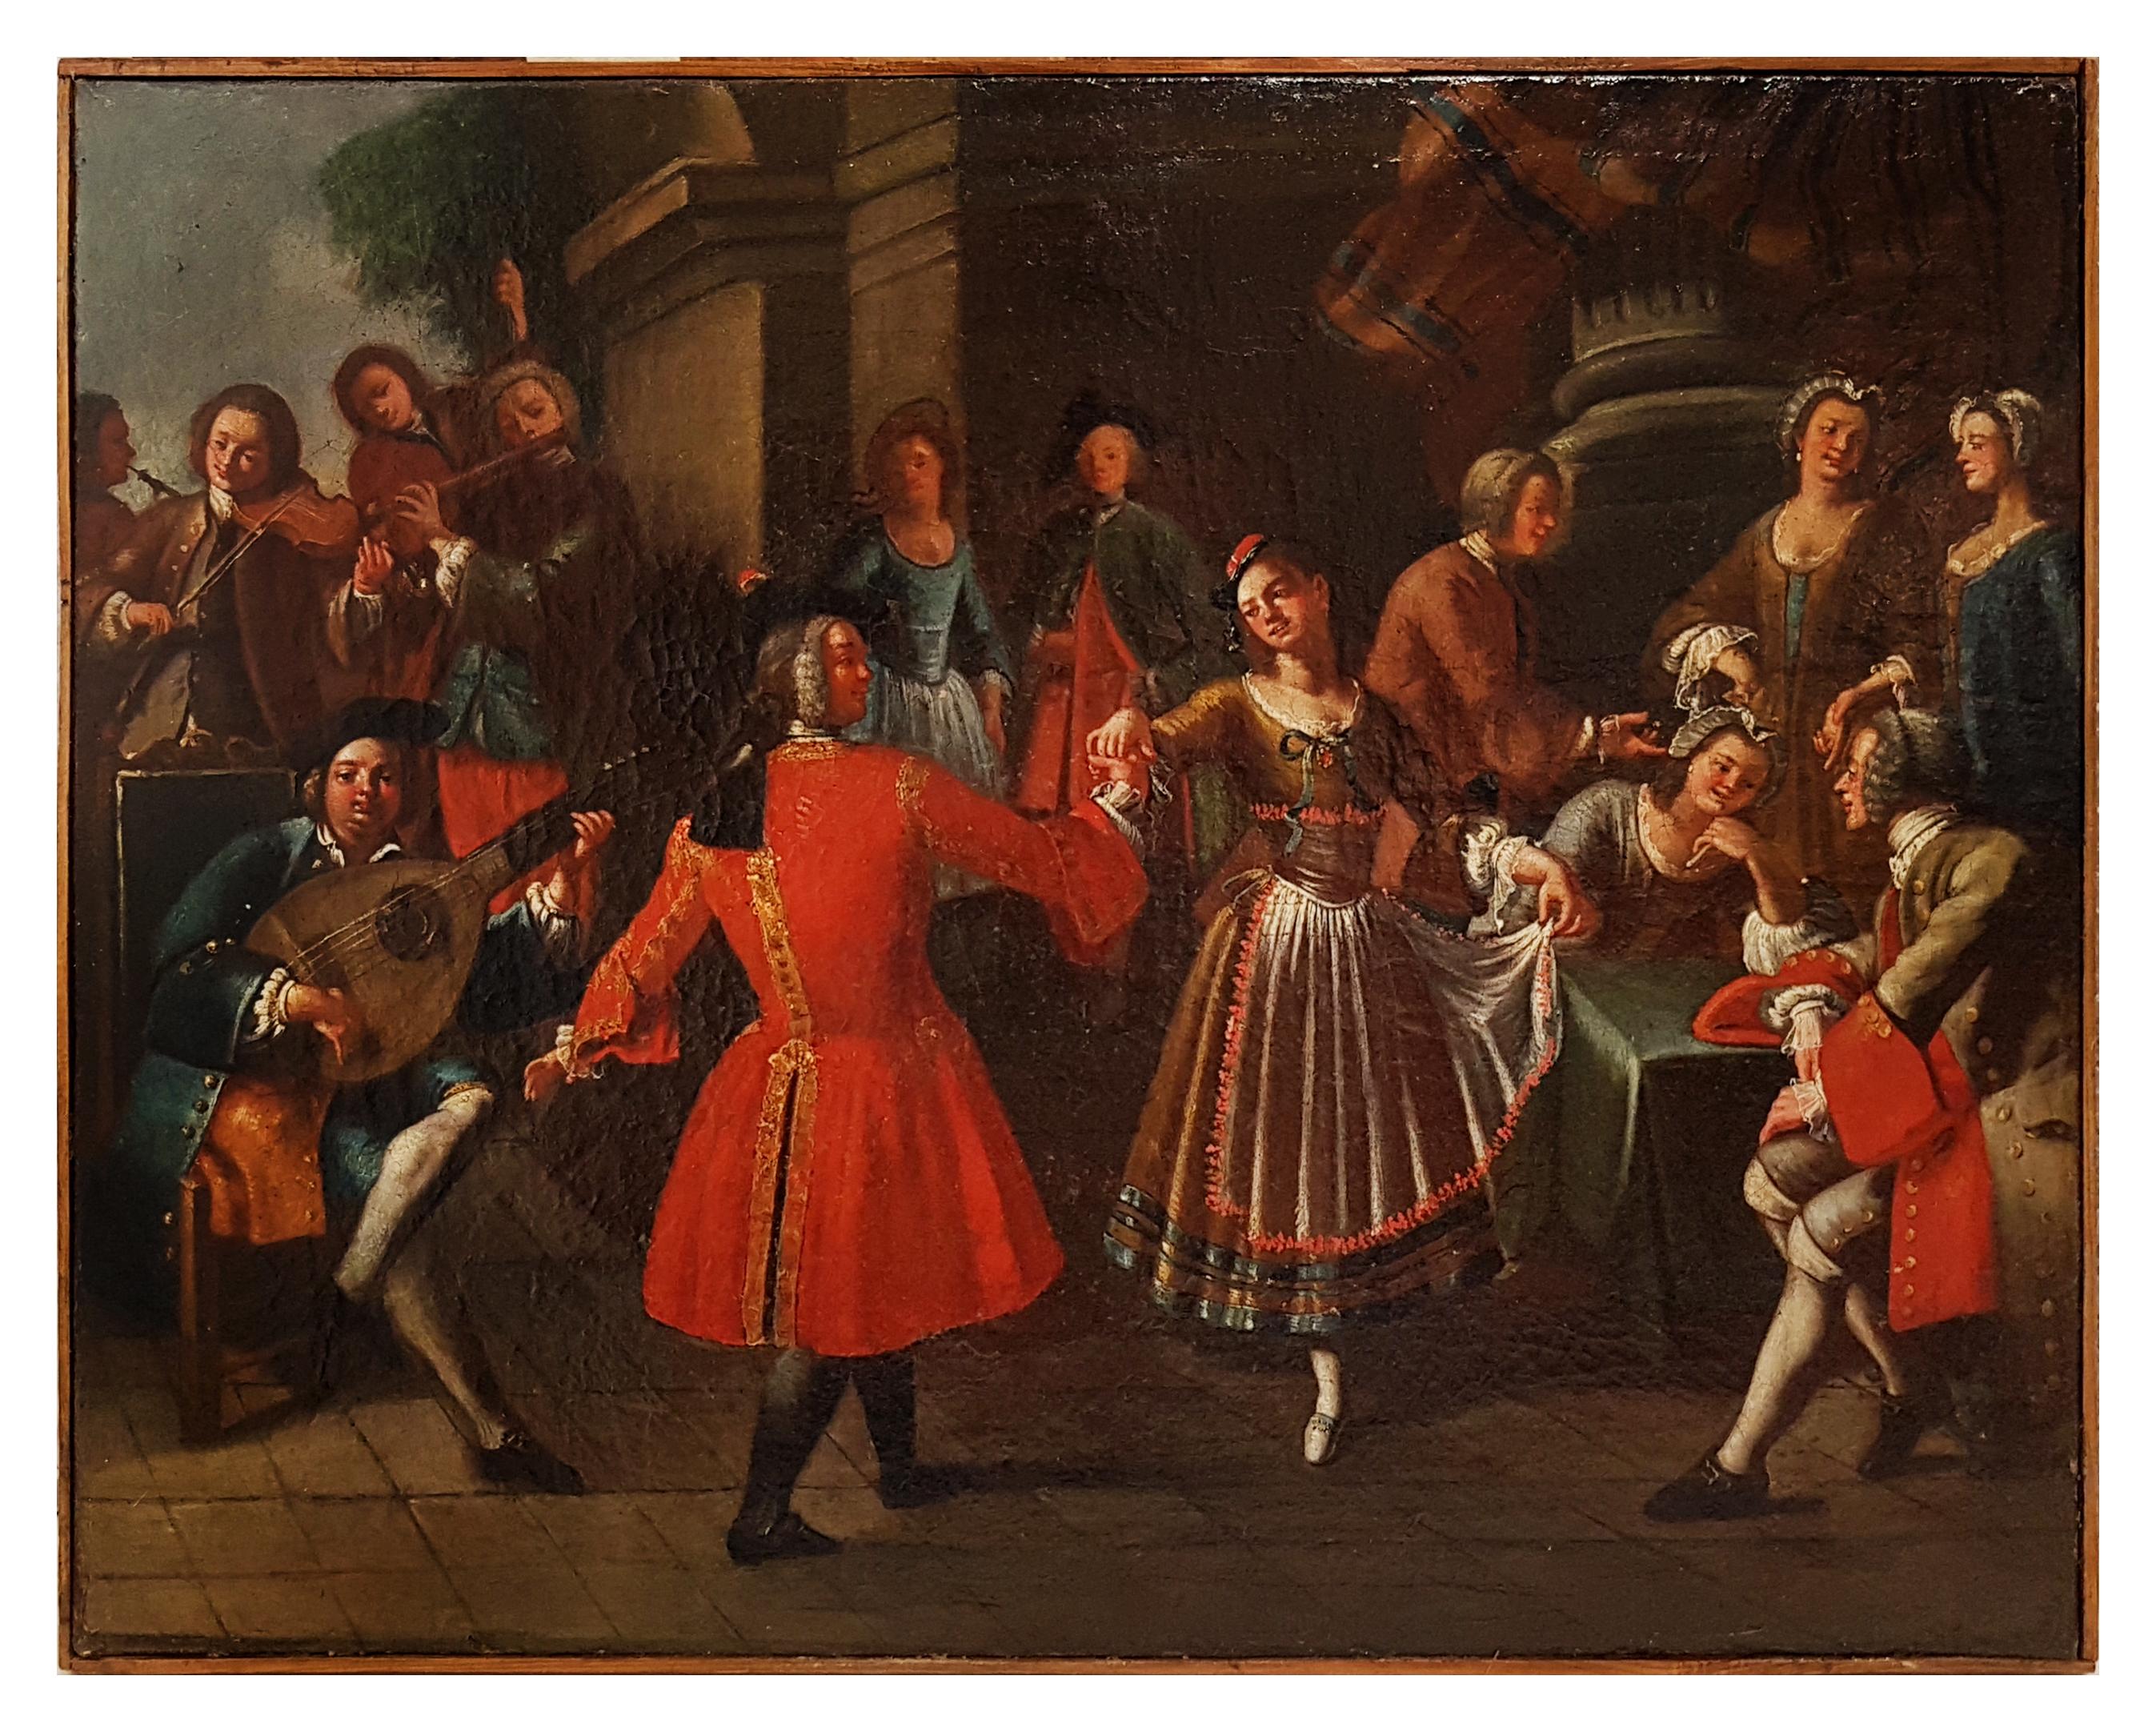 Unknown Interior Painting - Pair of Scenes of Celebration with Musicians - Oil on Canvas - 18th Century